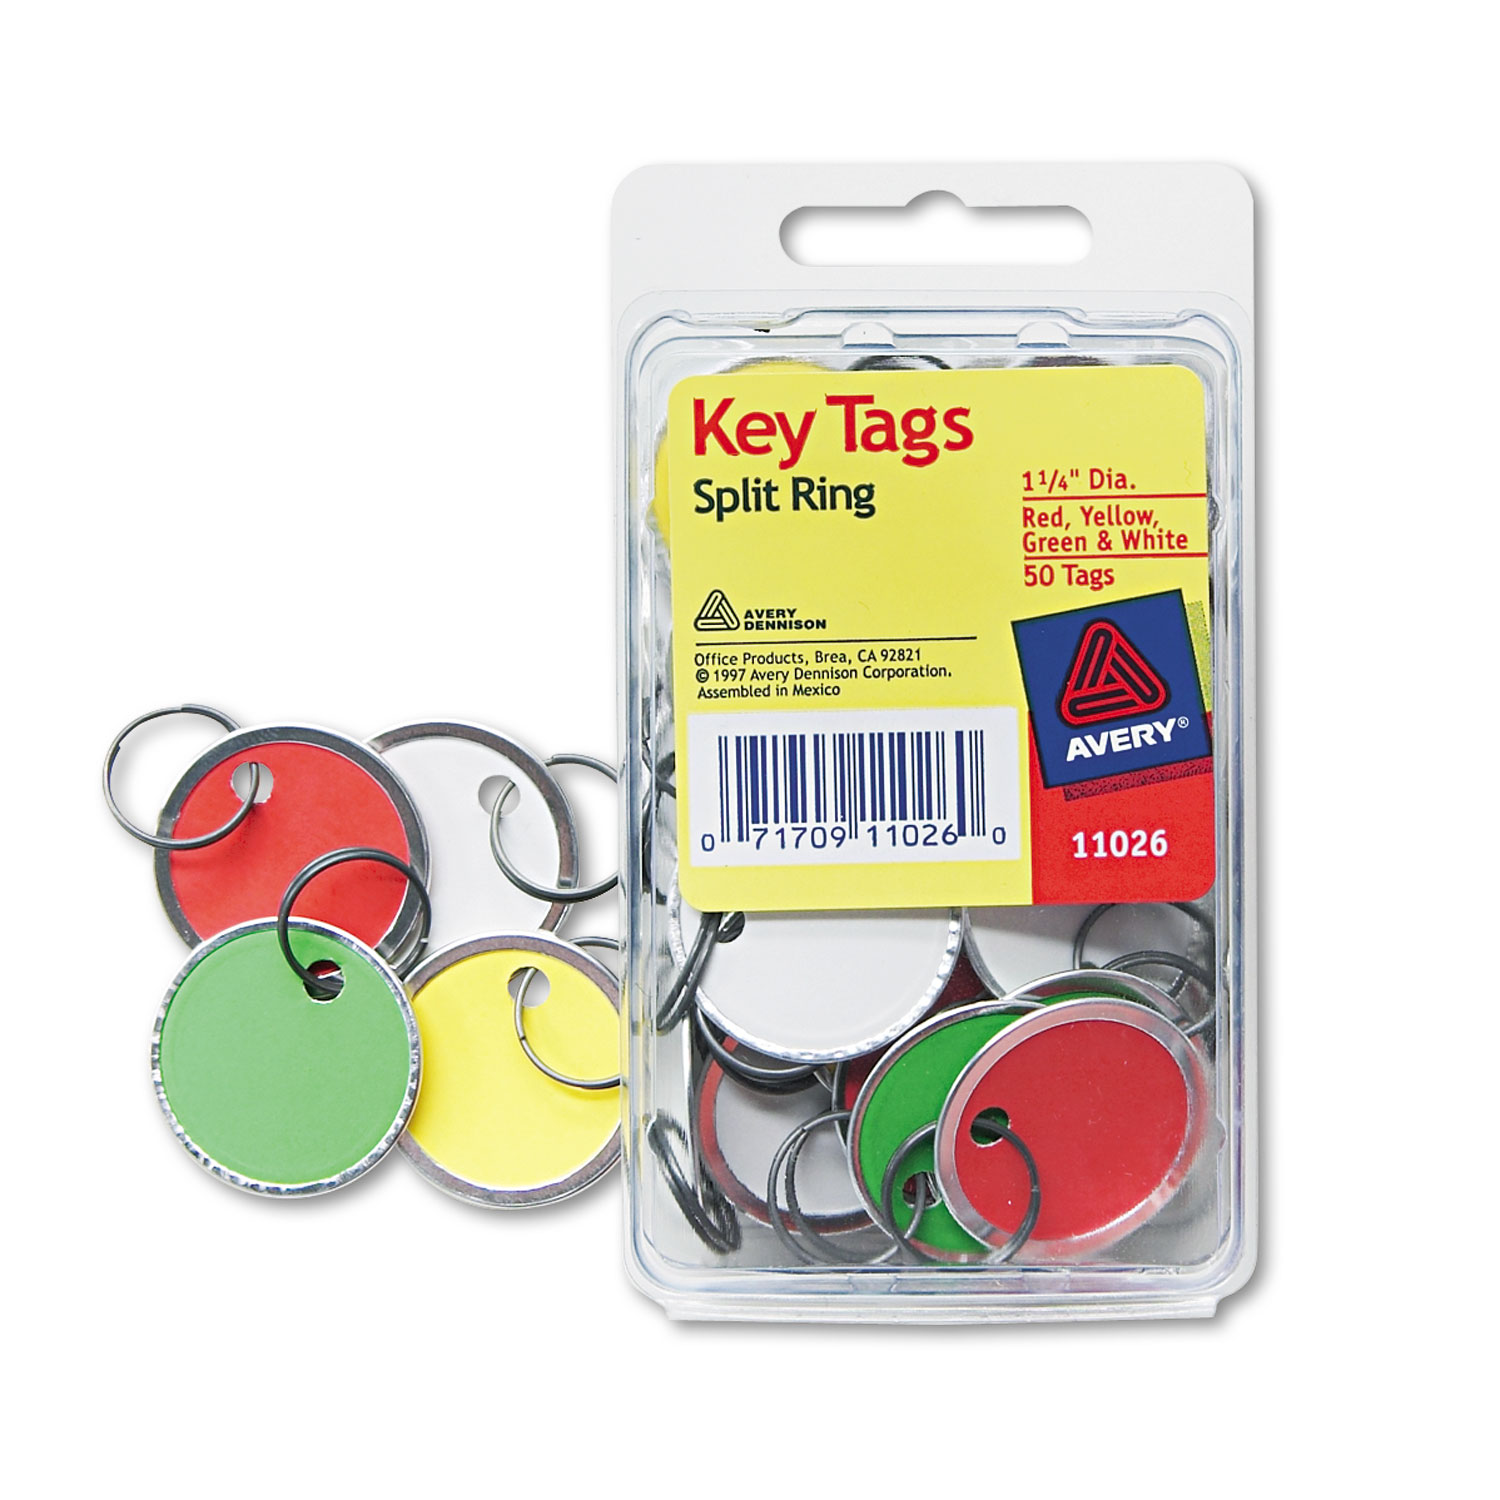 Assorted Colors Tough Plastic Key Tags With Split Ring Label Window Buy  Assorted Colors Keychains,Plastic Key Tags With Split Ring,Plastic Key Tags  With Split Ring Label Window Product On | Pack Of